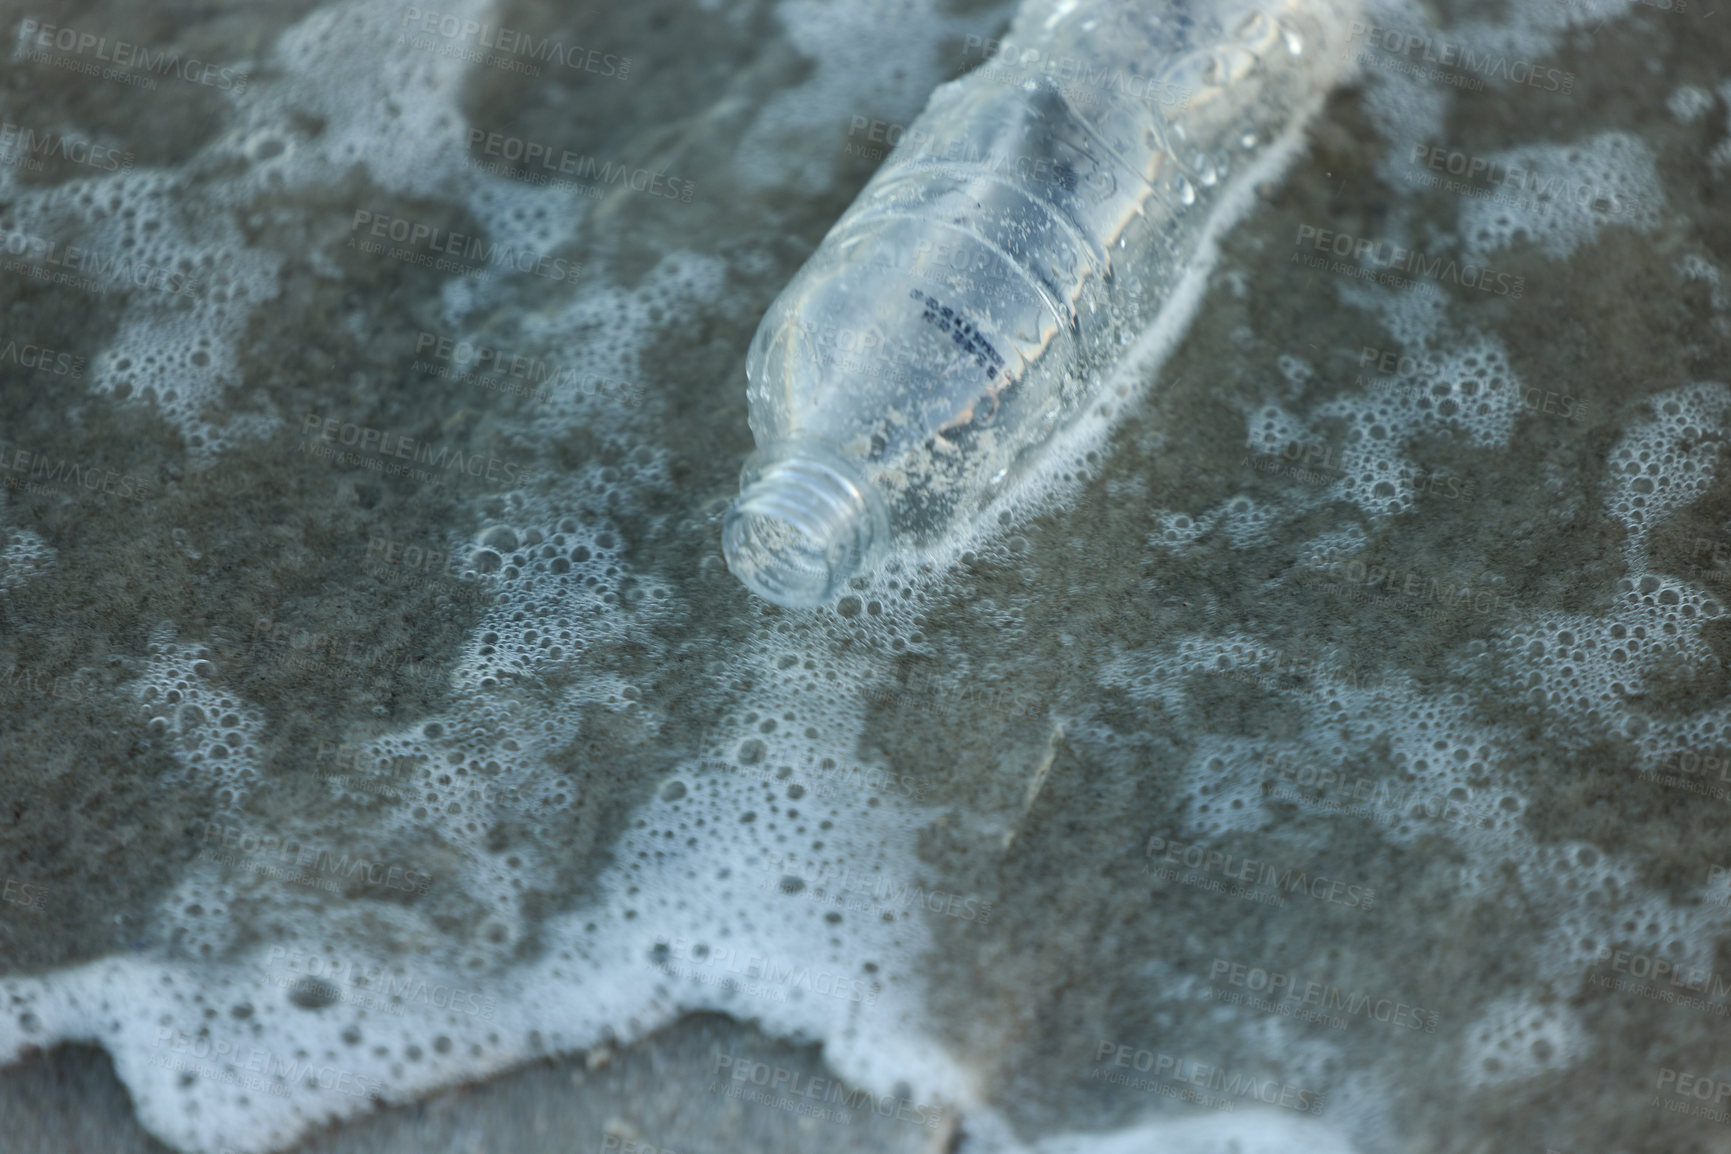 Buy stock photo Shot of a bottle laying on the beach